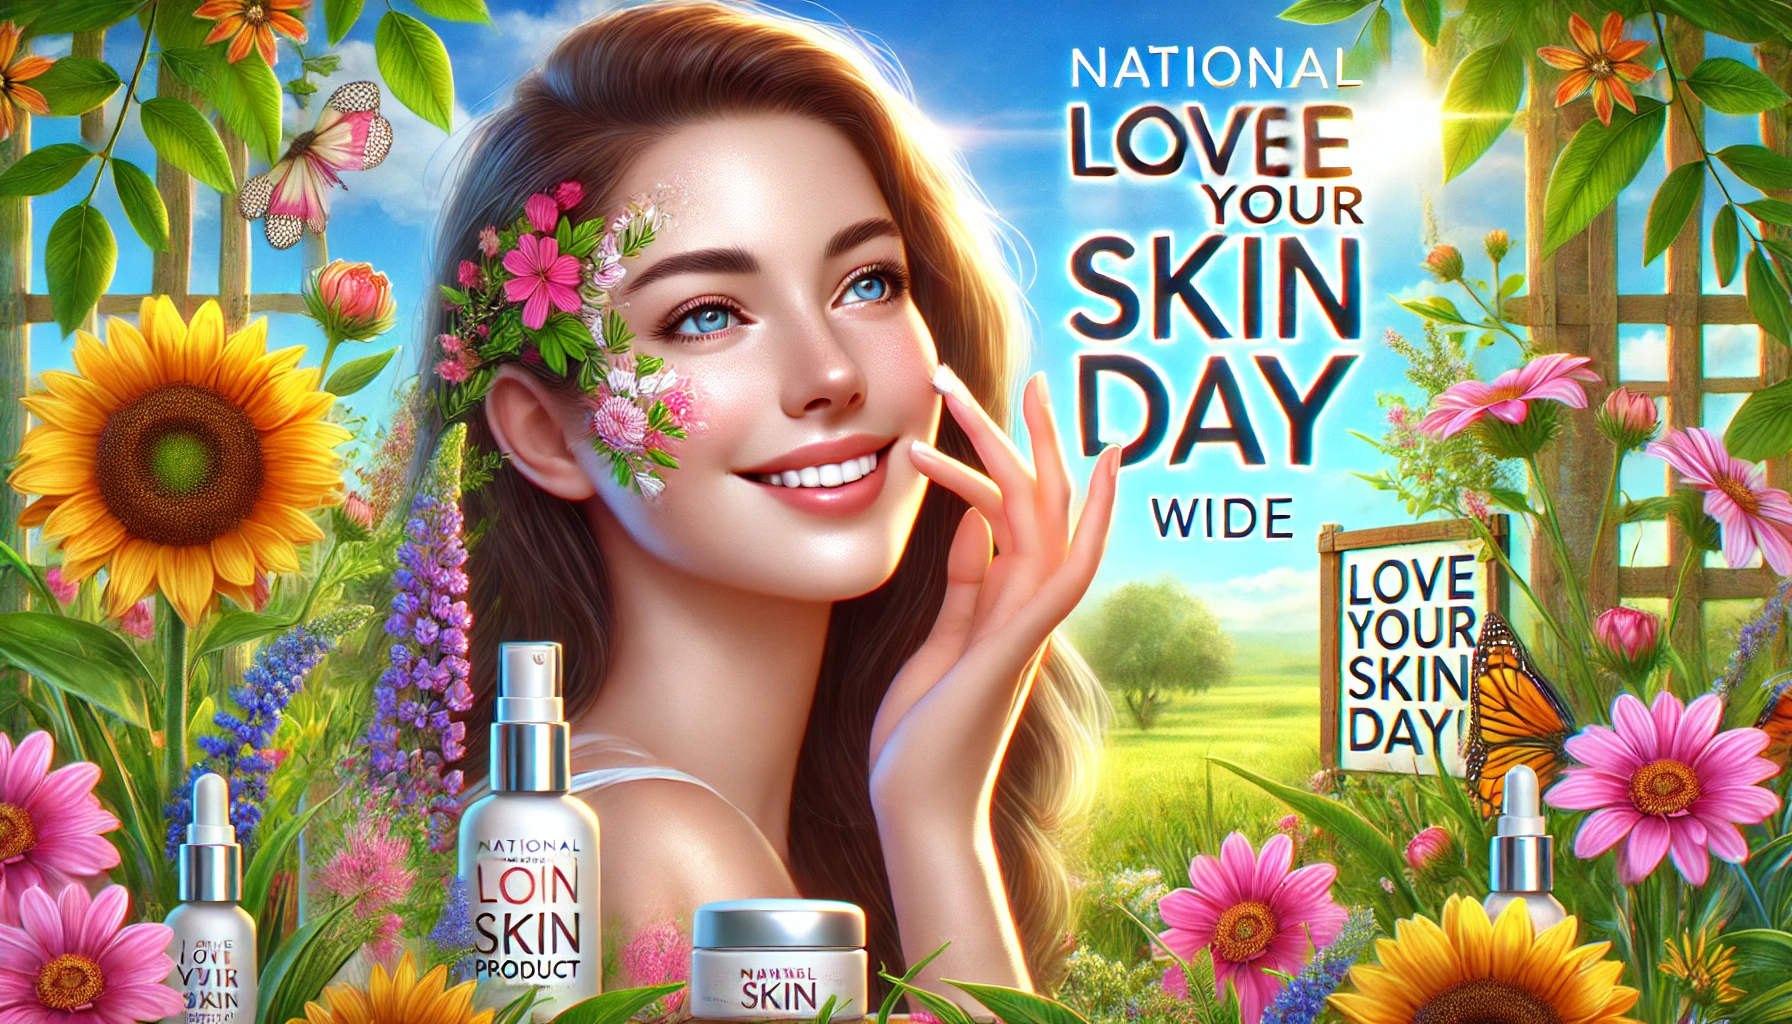 National Love Your Skin Day